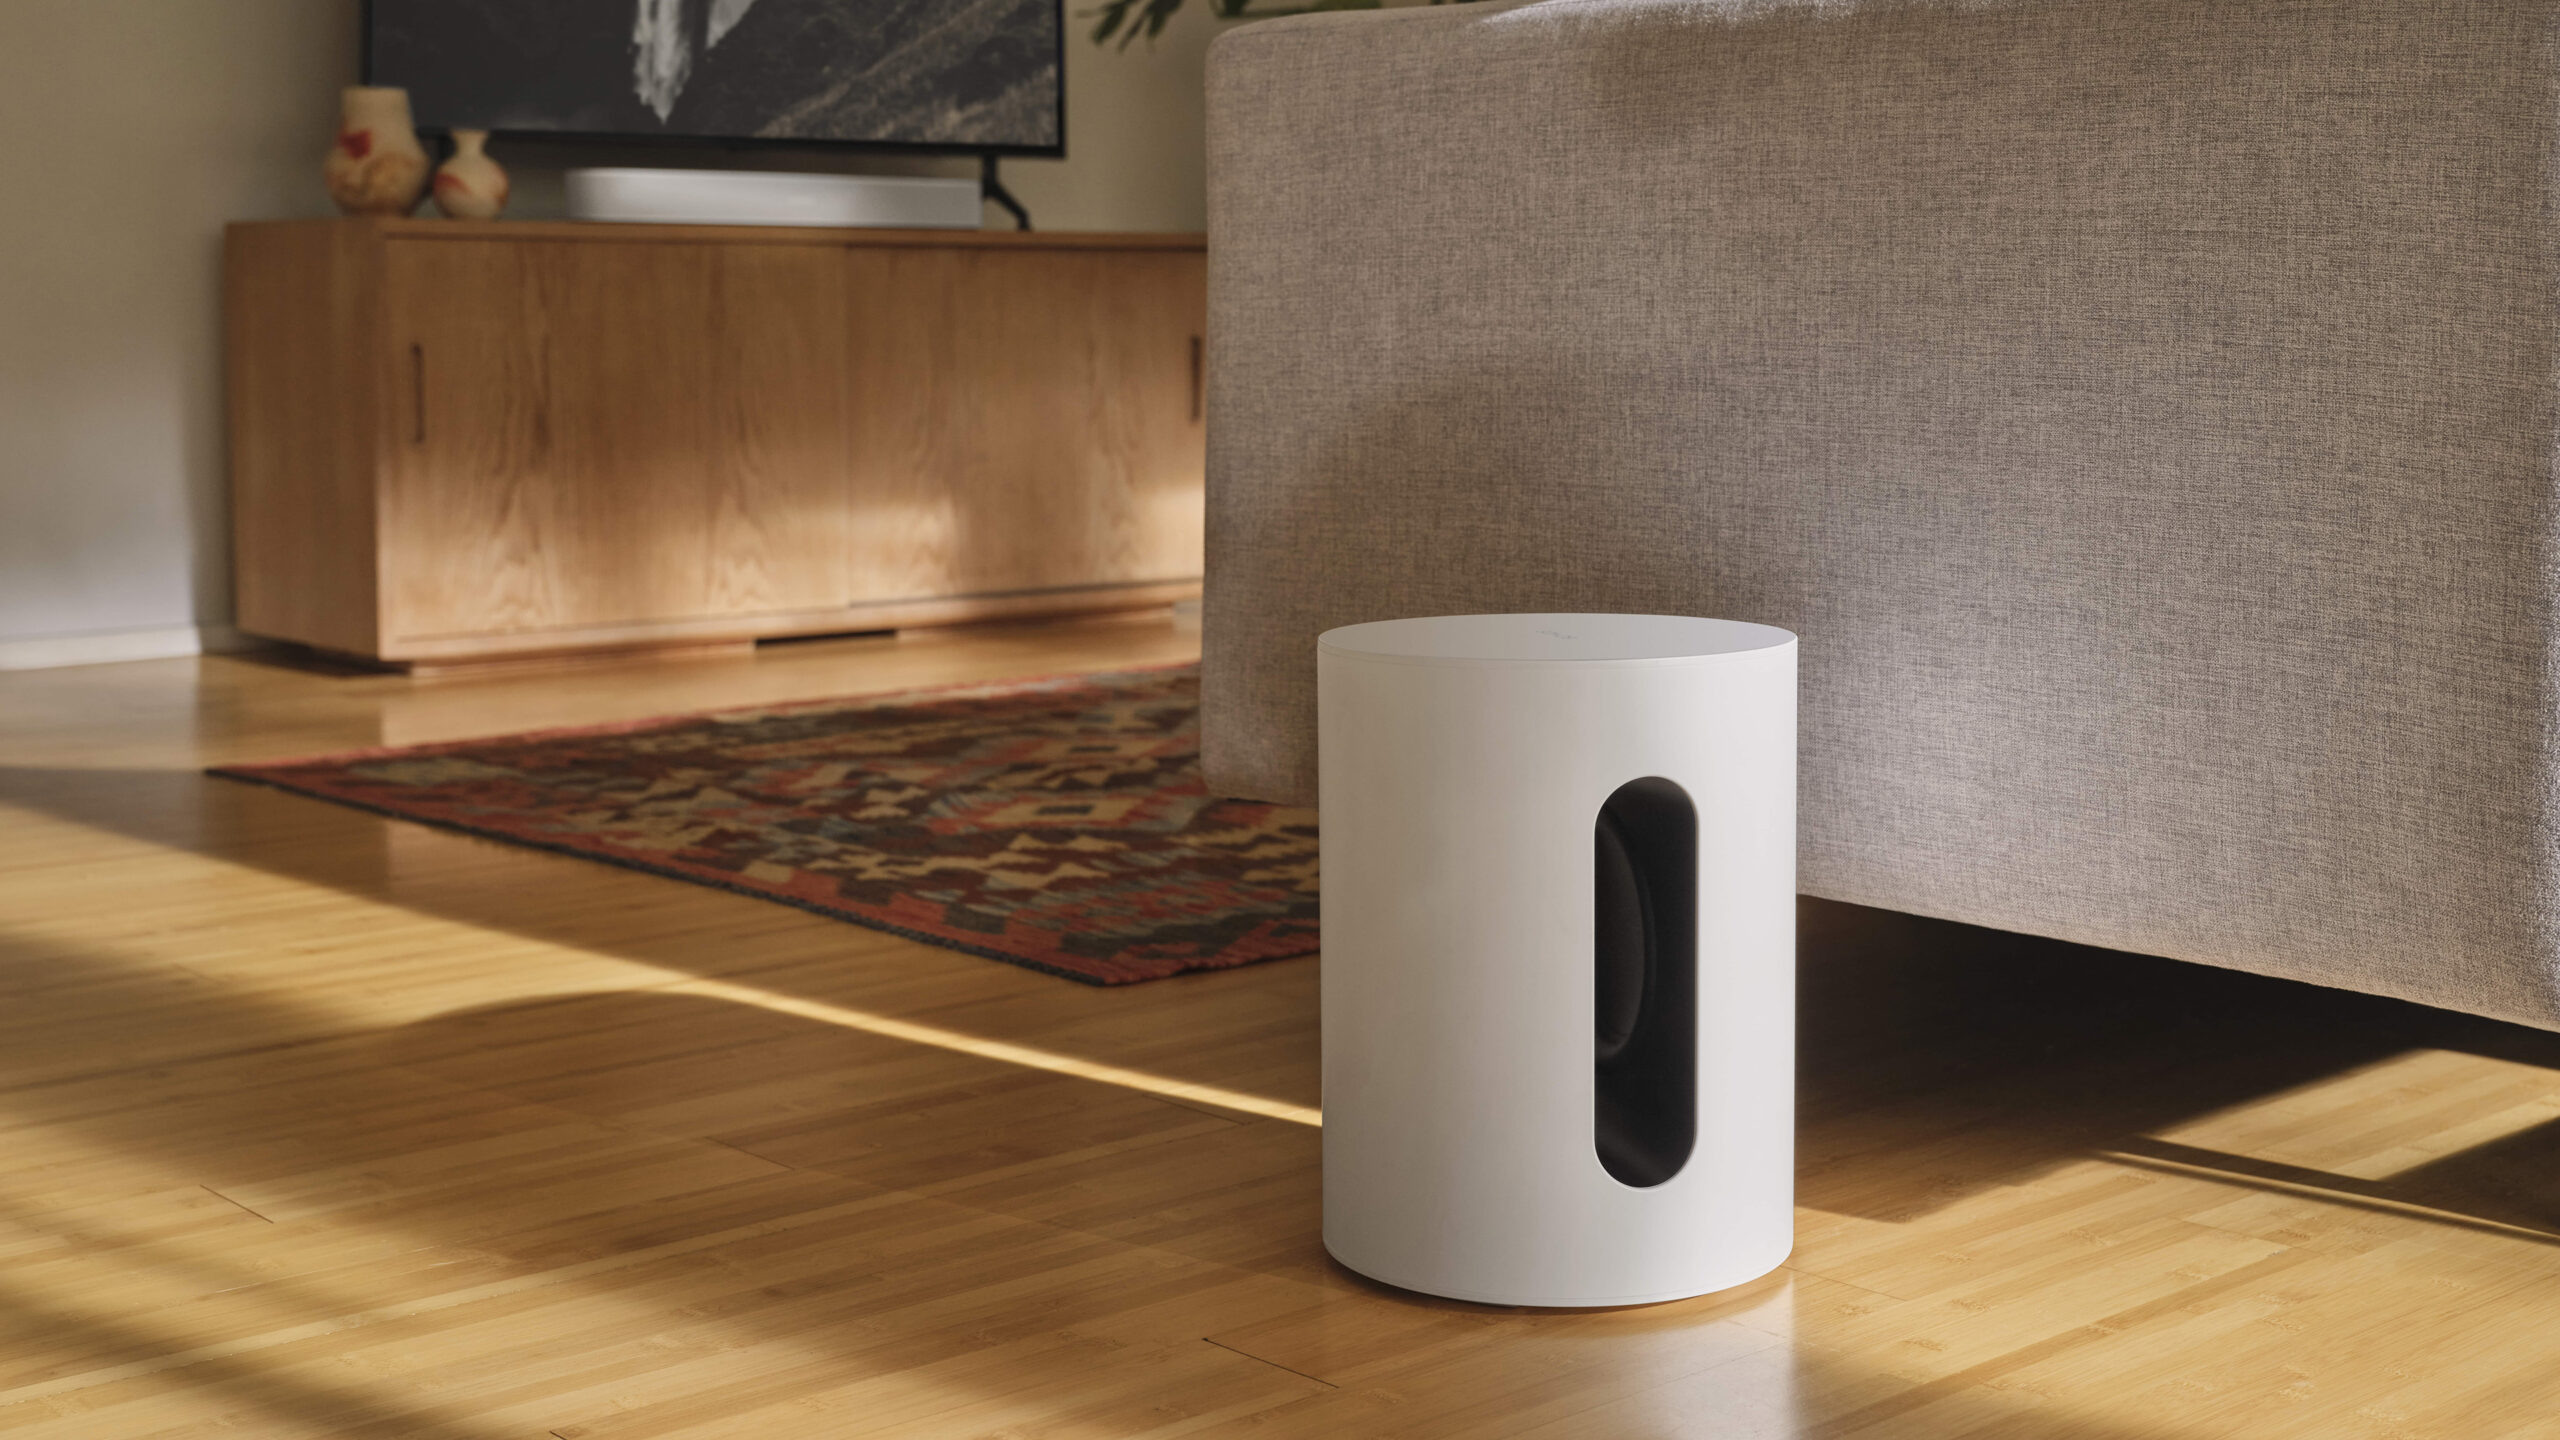 chikane befolkning overskridelsen Review: Sonos Sub Mini | A Long-awaited, More Affordable Sonos Sub